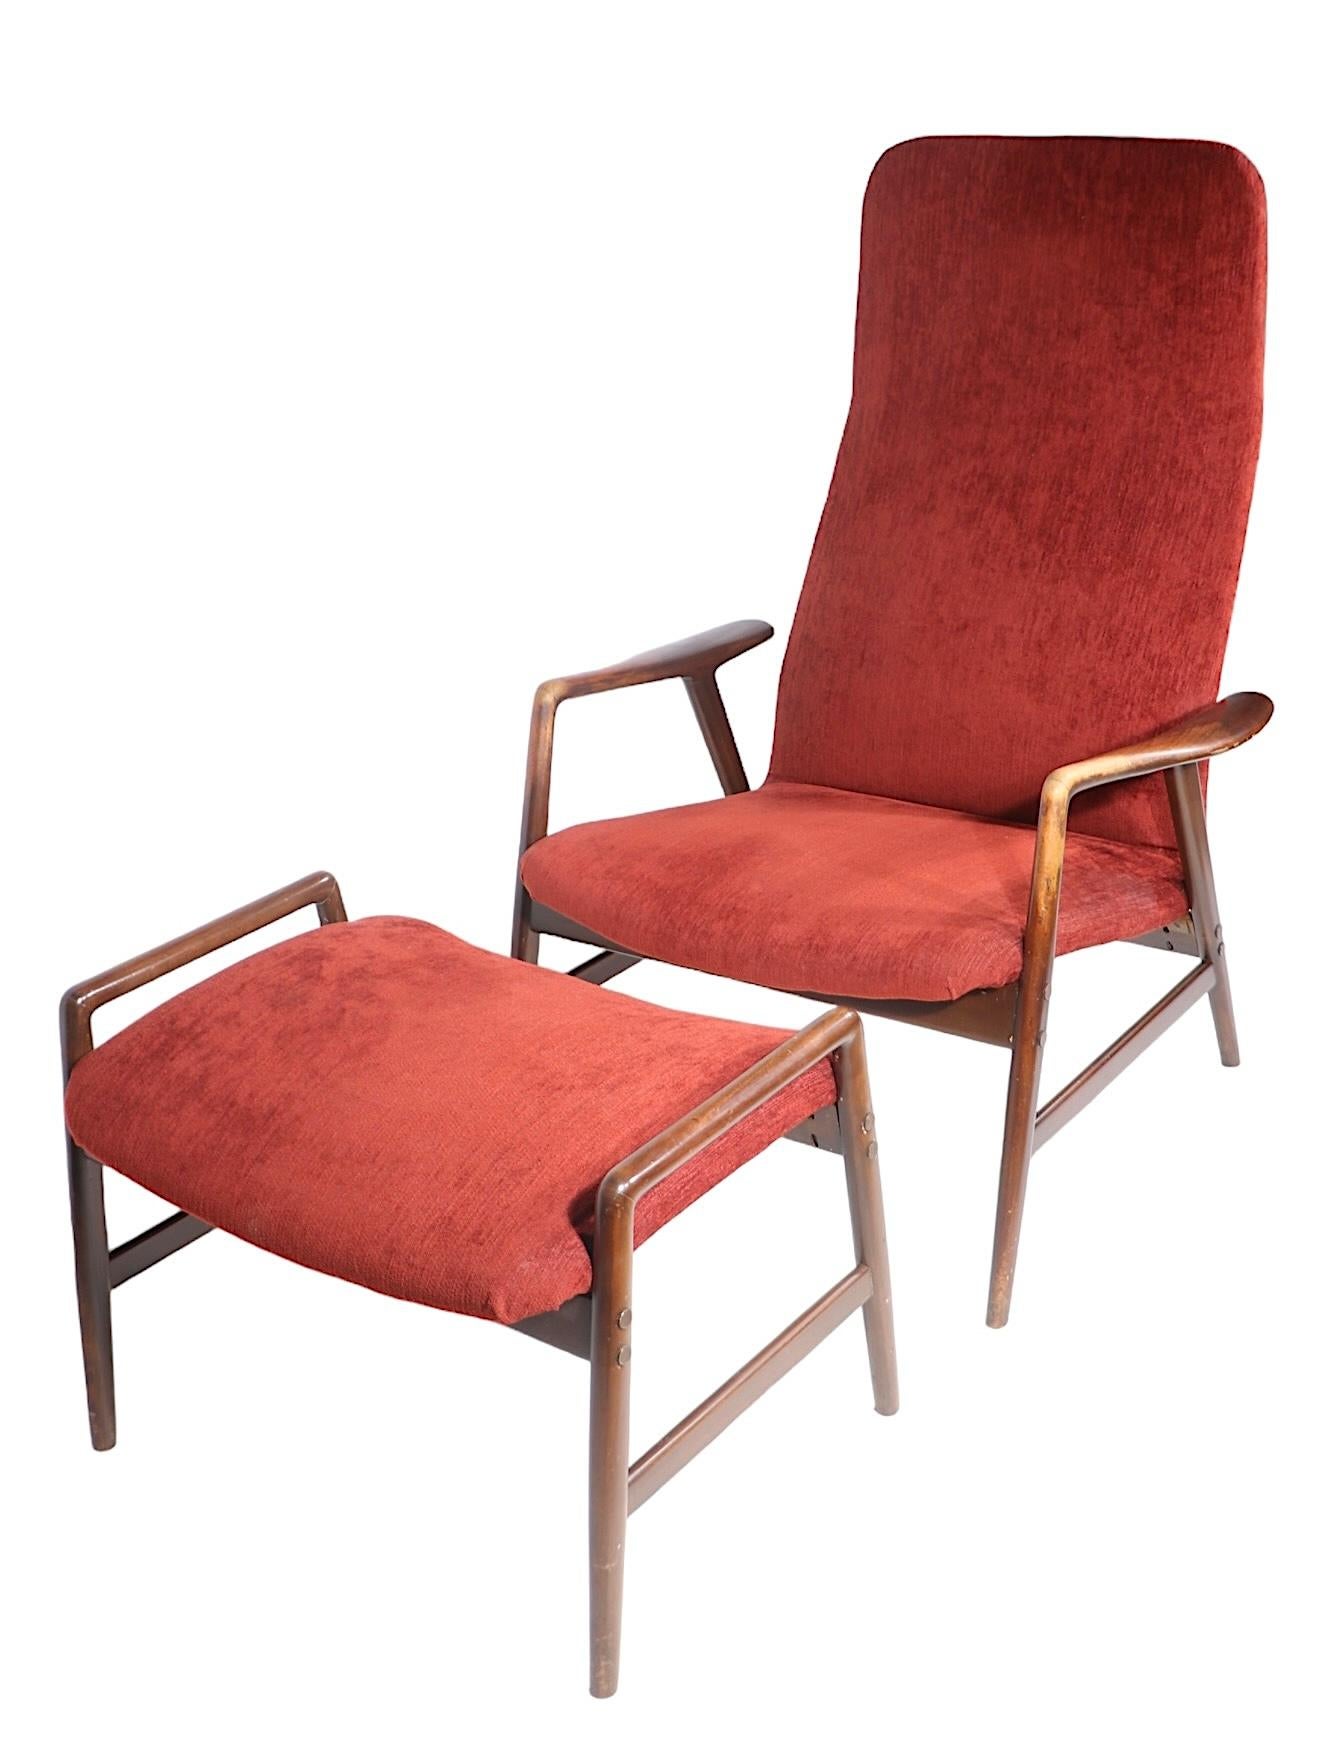 Mid Century Lounge Chair and Ottoman by Alf Svensson for Fritz Hansen c. 1960's For Sale 10